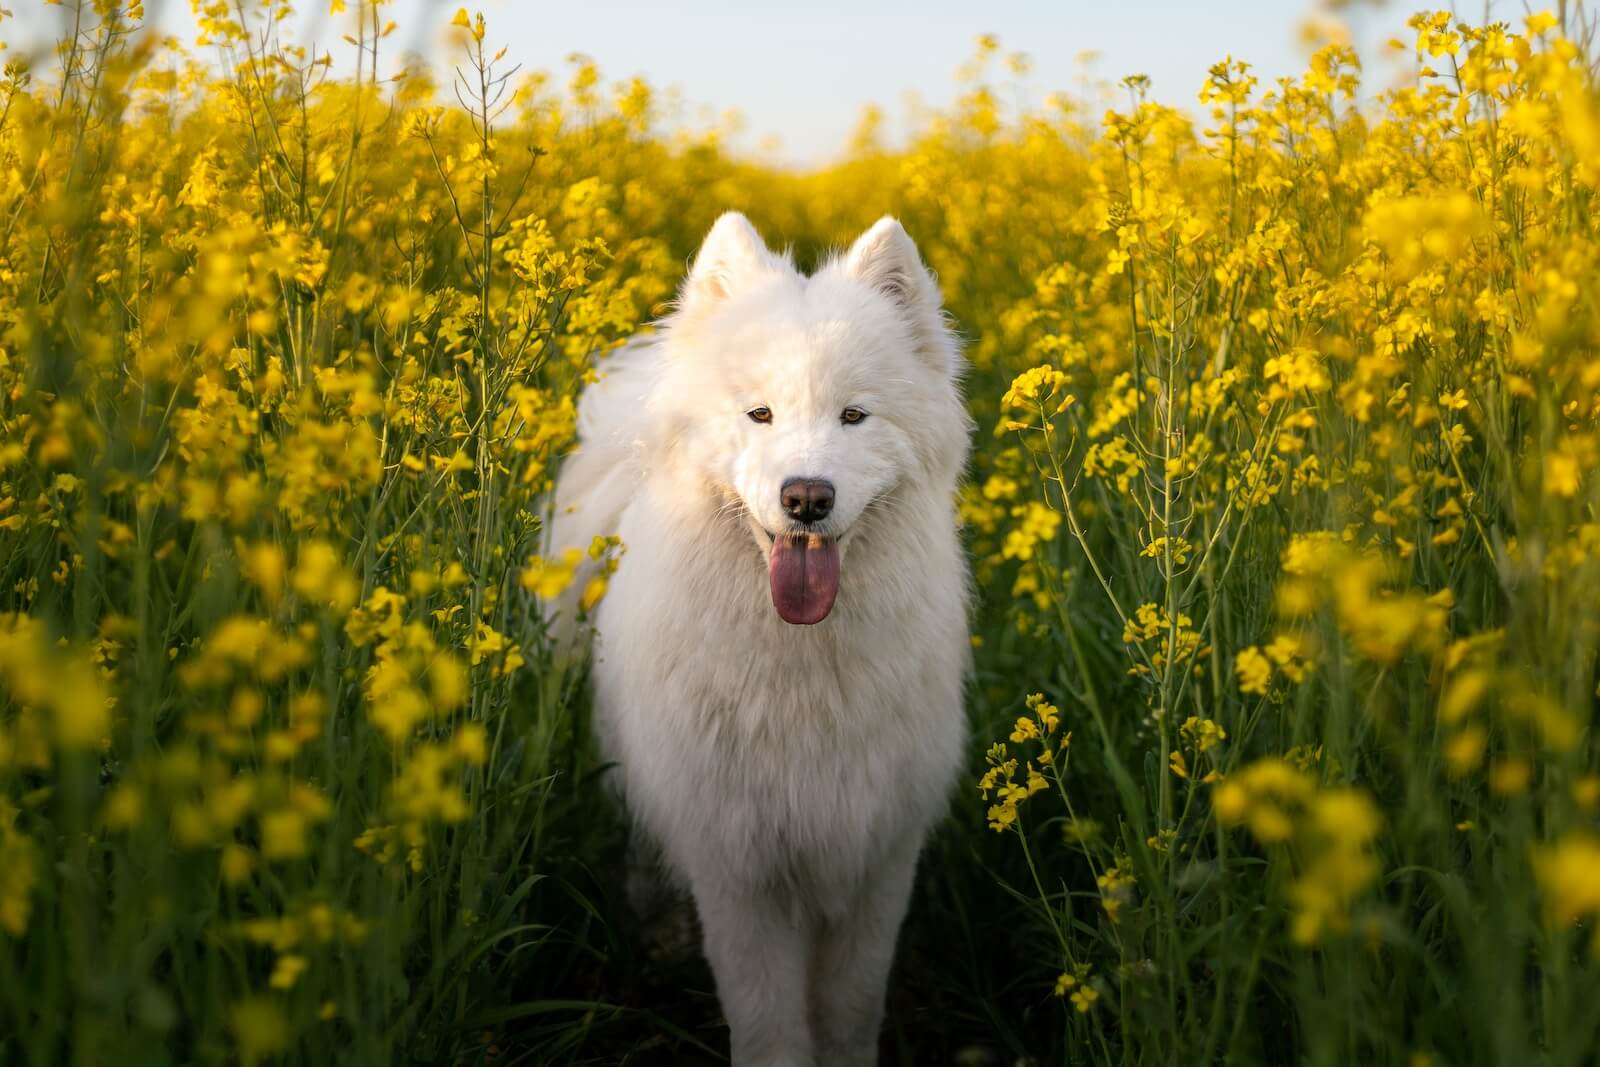 A Samoyed dog surrounded by yellow flowers